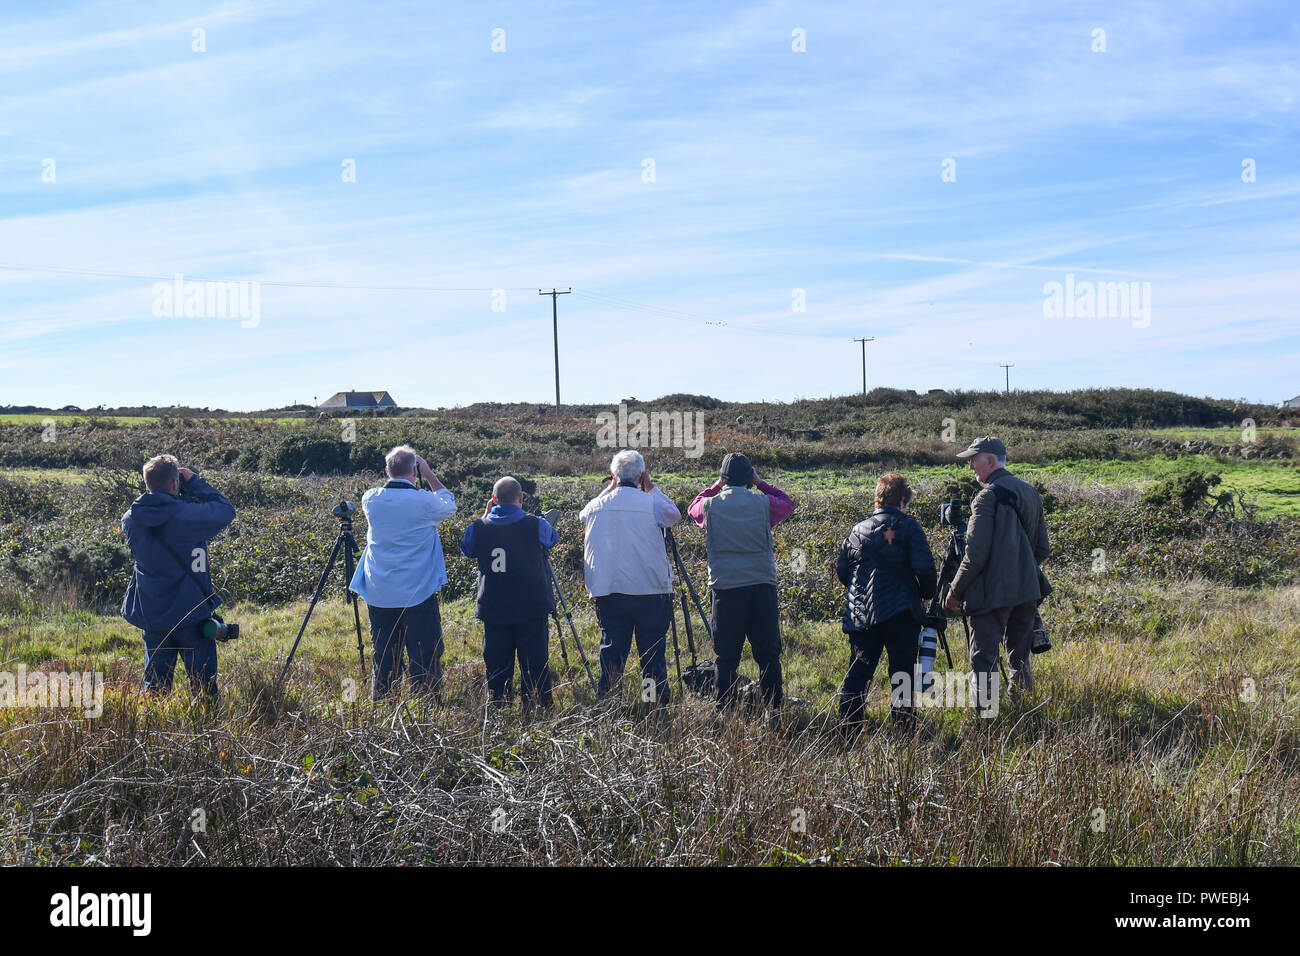 Lands End, Cornwall, UK. 16th October 2018. A rare Catbird, mostprobably blown over from America has been spotted down near Lands End. Twitchers from across the UK are coming down to see the bird. A local field has been opened up to accomodate the cars. Credit: Simon Maycock/Alamy Live News Stock Photo